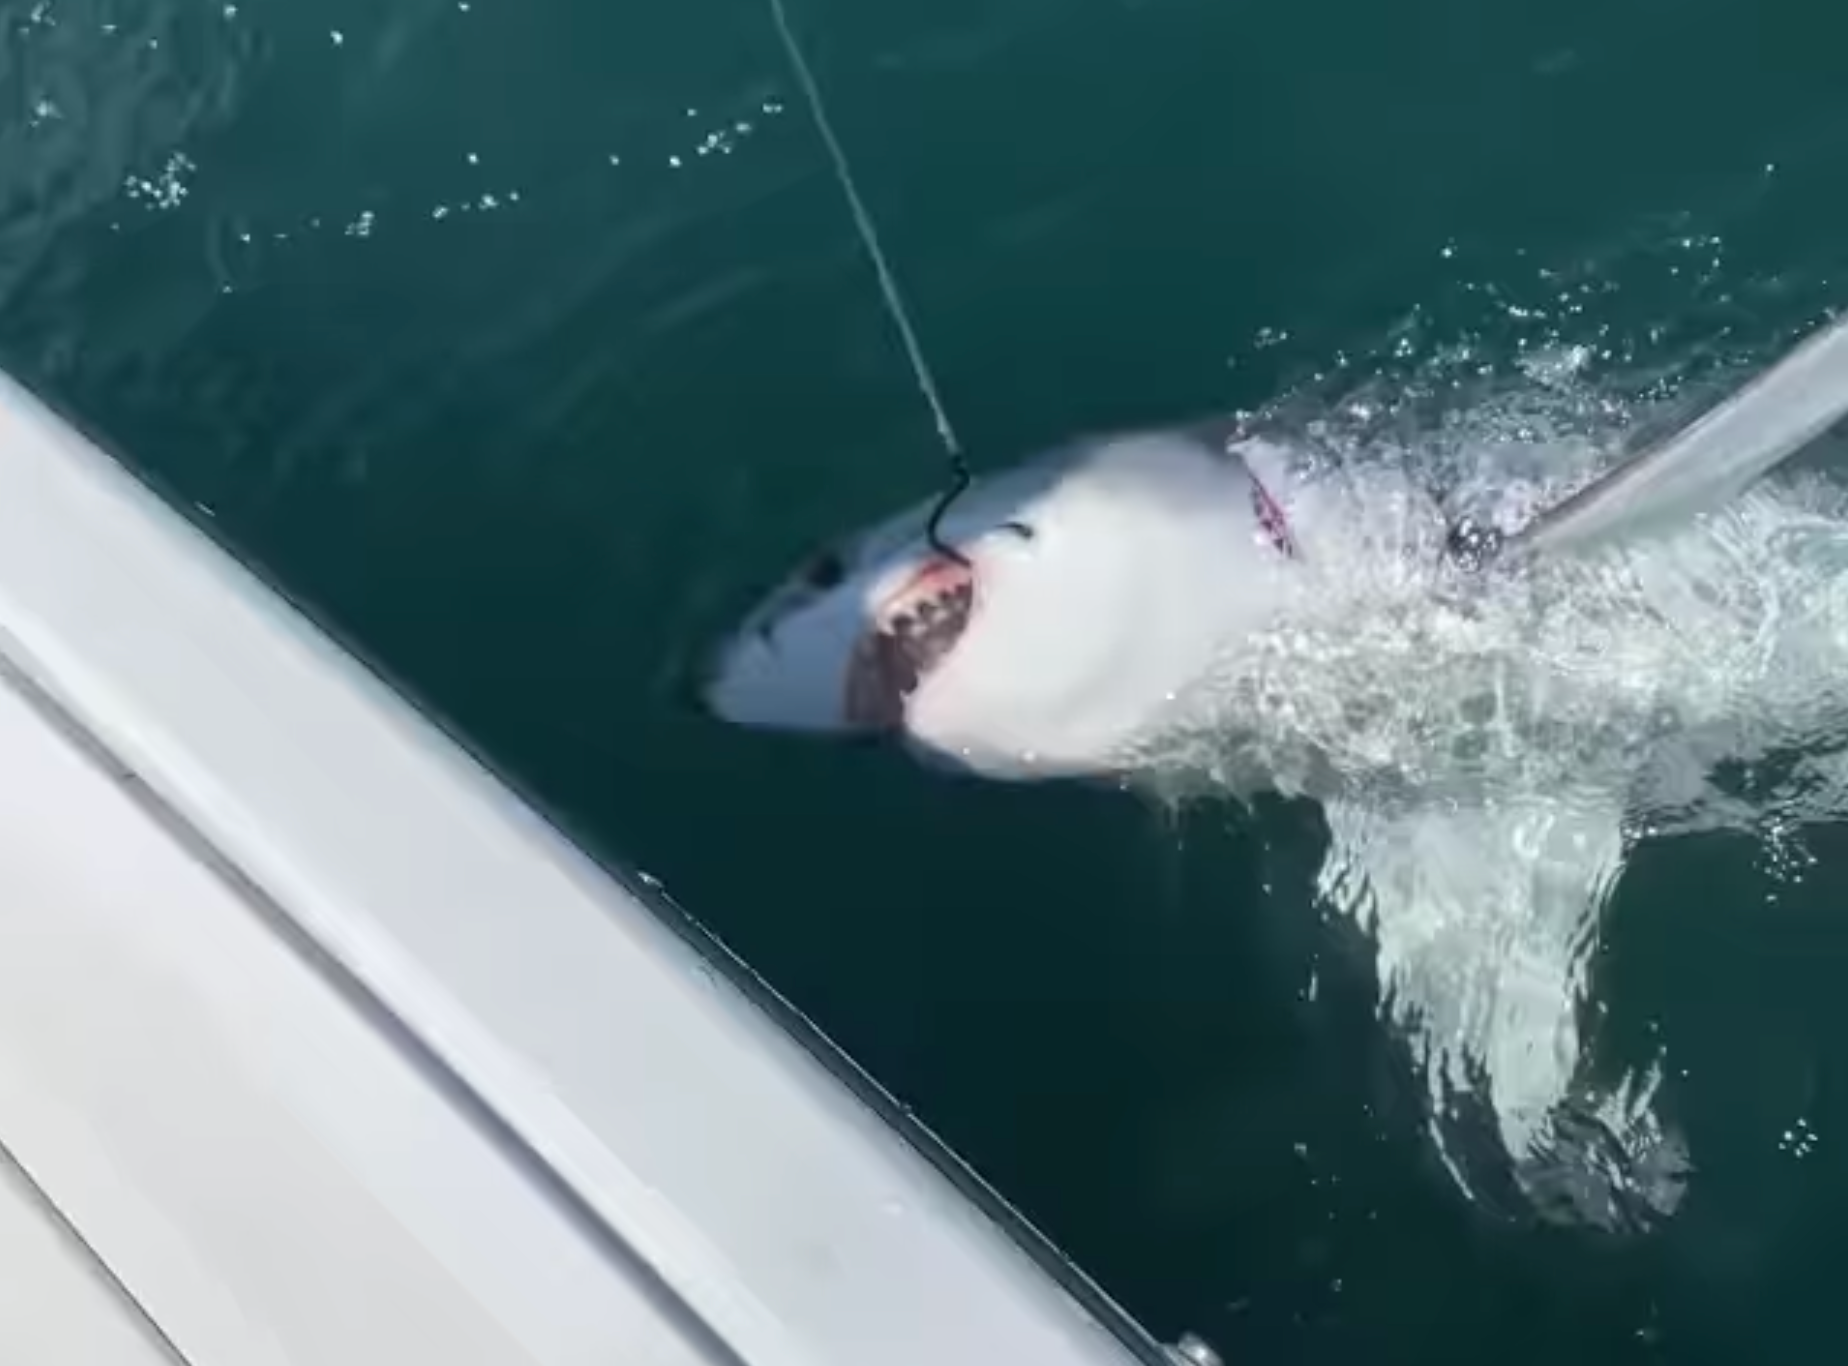 The fishing group Reel Innovation inadvertently caught a great white shark off the shores of New Jersey